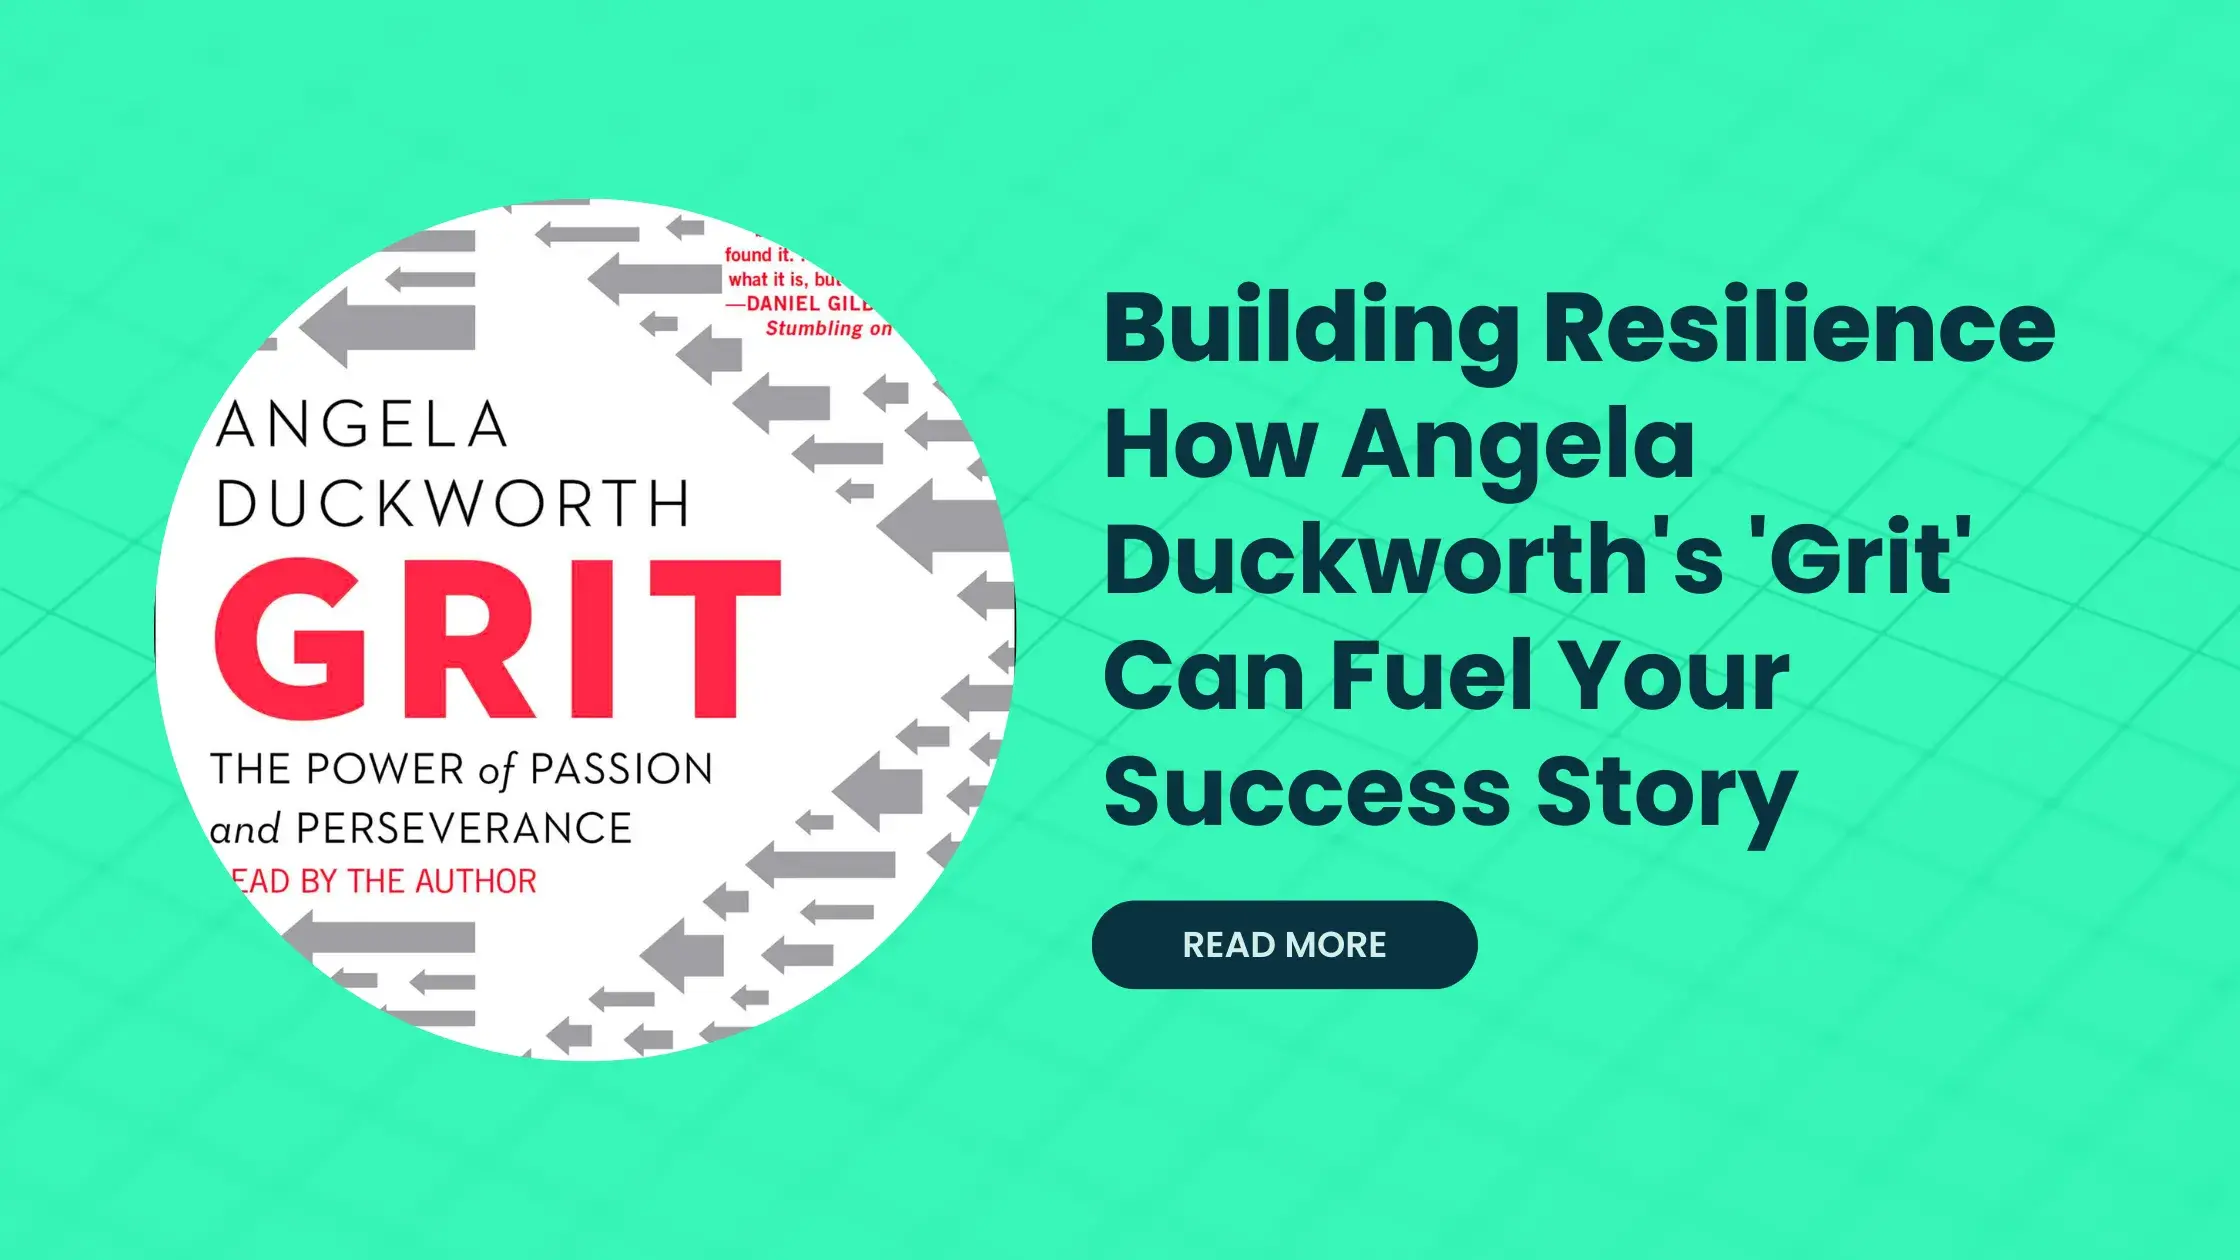 Building Resilience: How Angela Duckworth's 'Grit' Can Fuel Your Success Story